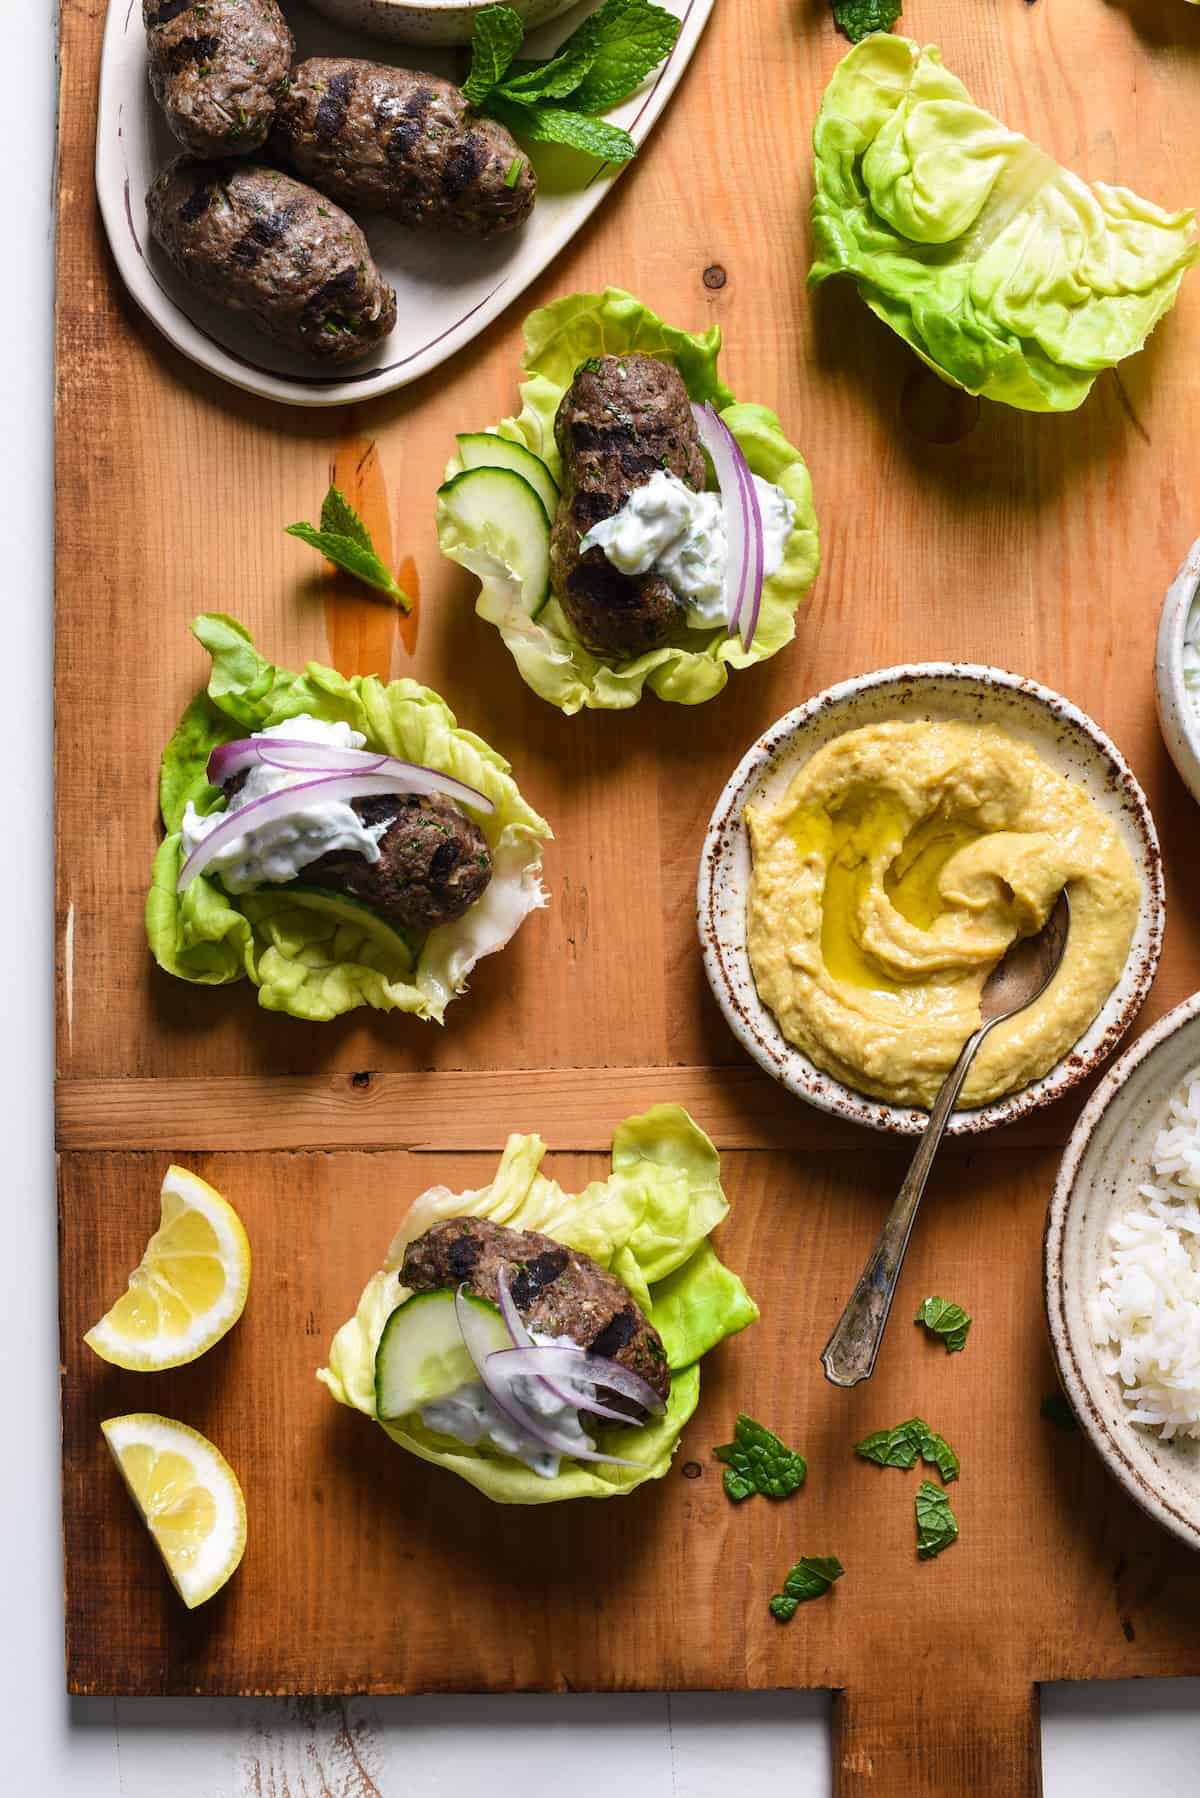 Grilled Kafta Lettuce Wraps - Spiced lamb and beef patties are wrapped in cooling butter lettuce leaves for a fresh and flavorful meal you'll want to serve every week! | foxeslovelemons.com